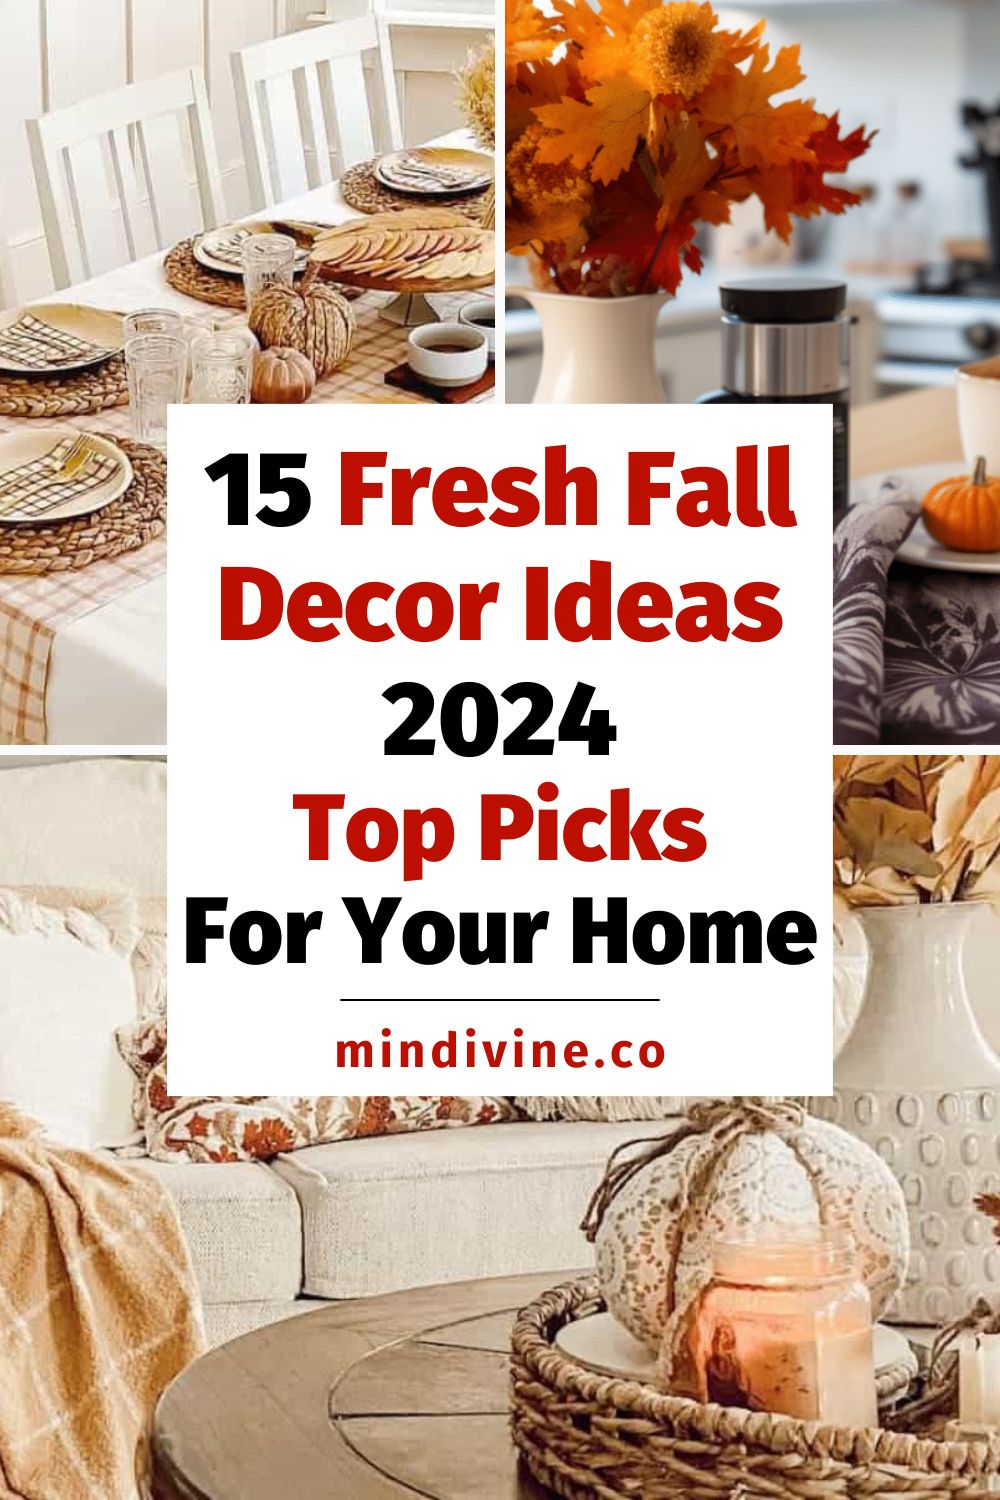 Pinterest Pin with 3 fall decor ideas for home 2024.